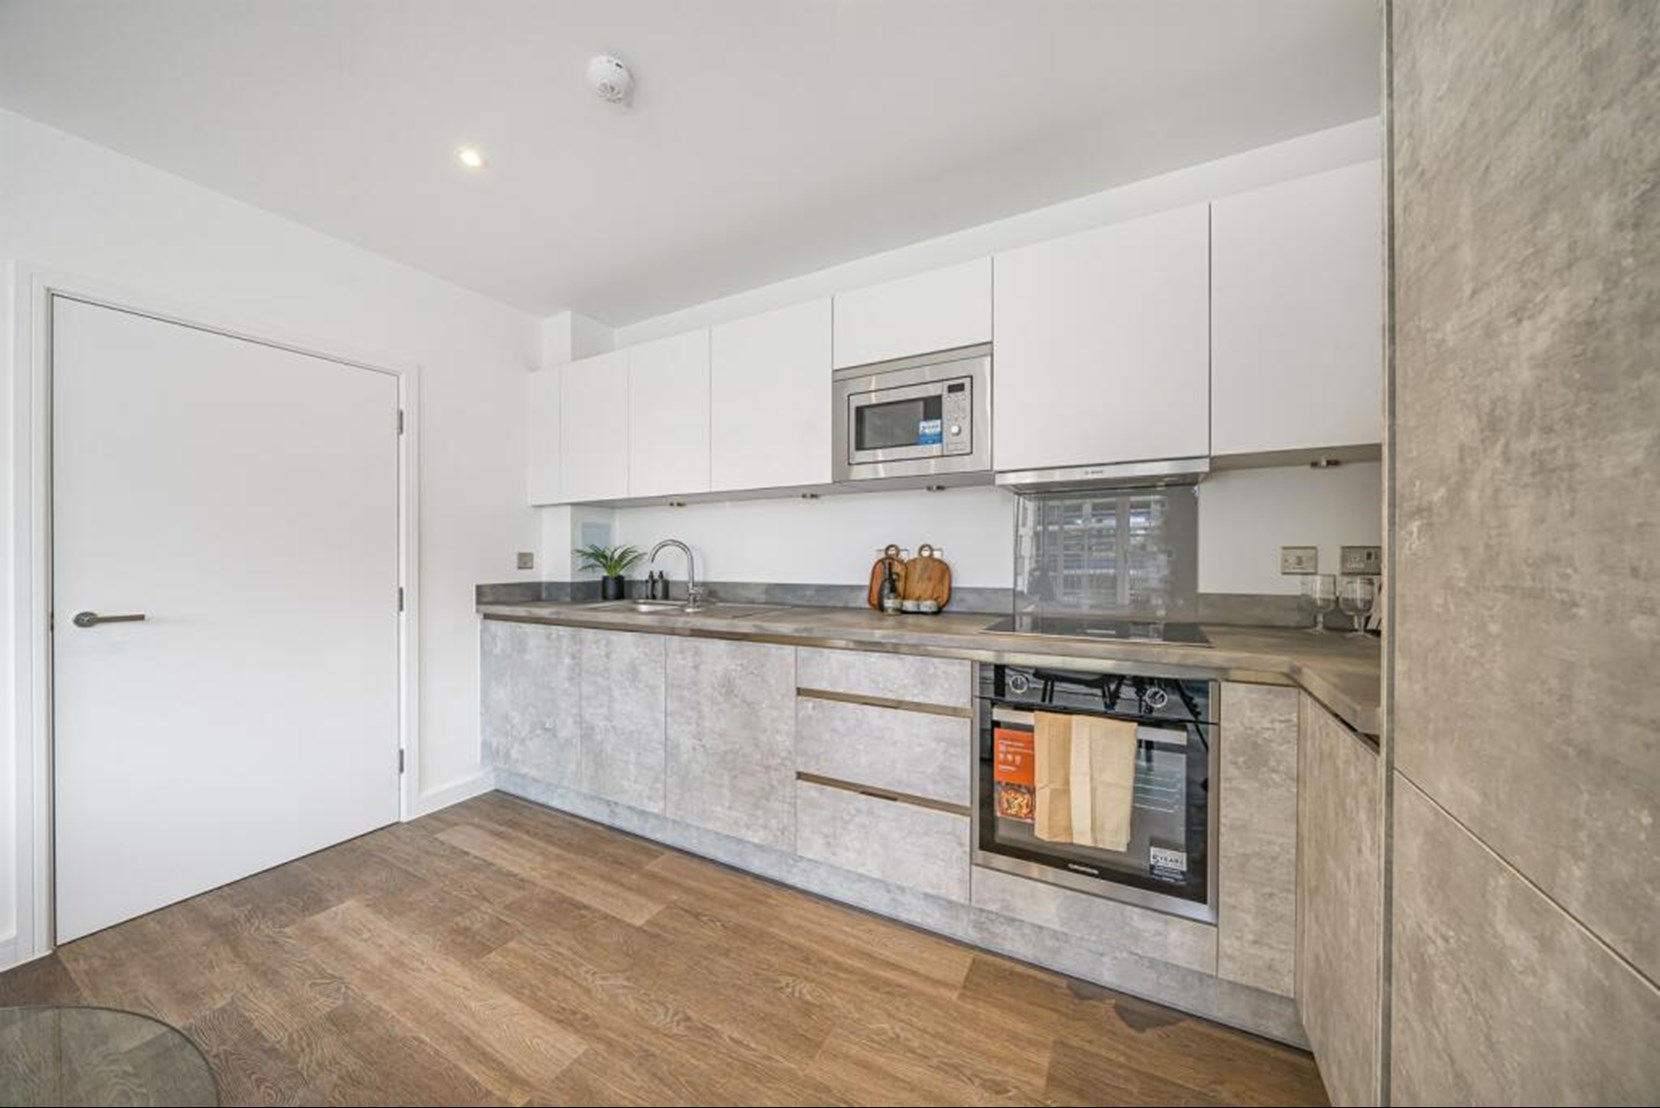 Apartments to Rent by Simple Life London in Beam Park, Havering, RM13, The Corrida kitchen